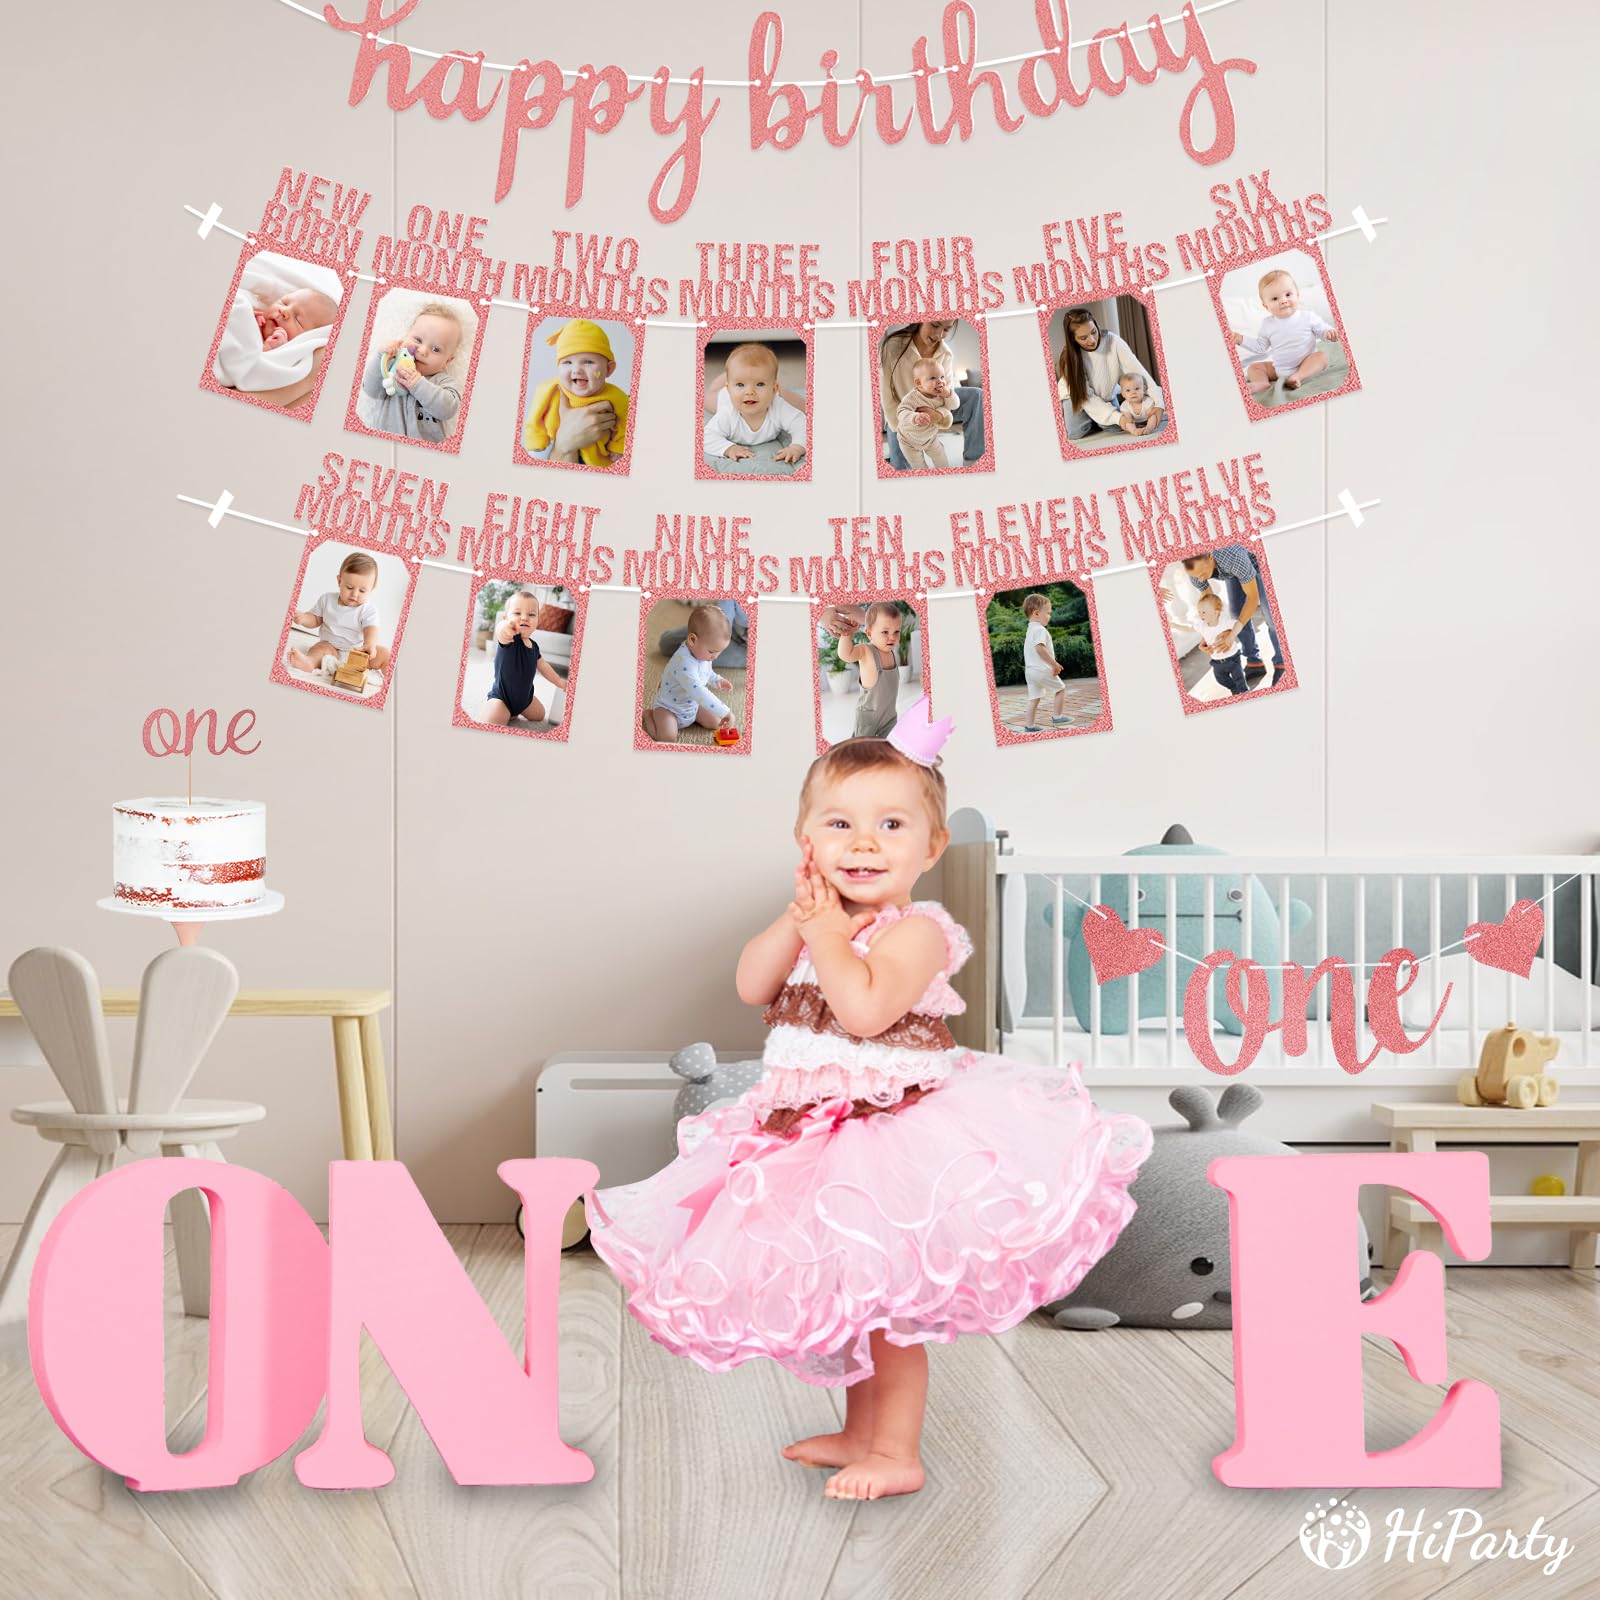 1st Birthday Baby Photo Banner, Happy Birthday Banner 17pcs First Birthday Decorations for Girl Newborn to 12 Months, First Birthday Photo Banner Garland Bunting with ONE Cake Topper, Rose Gold